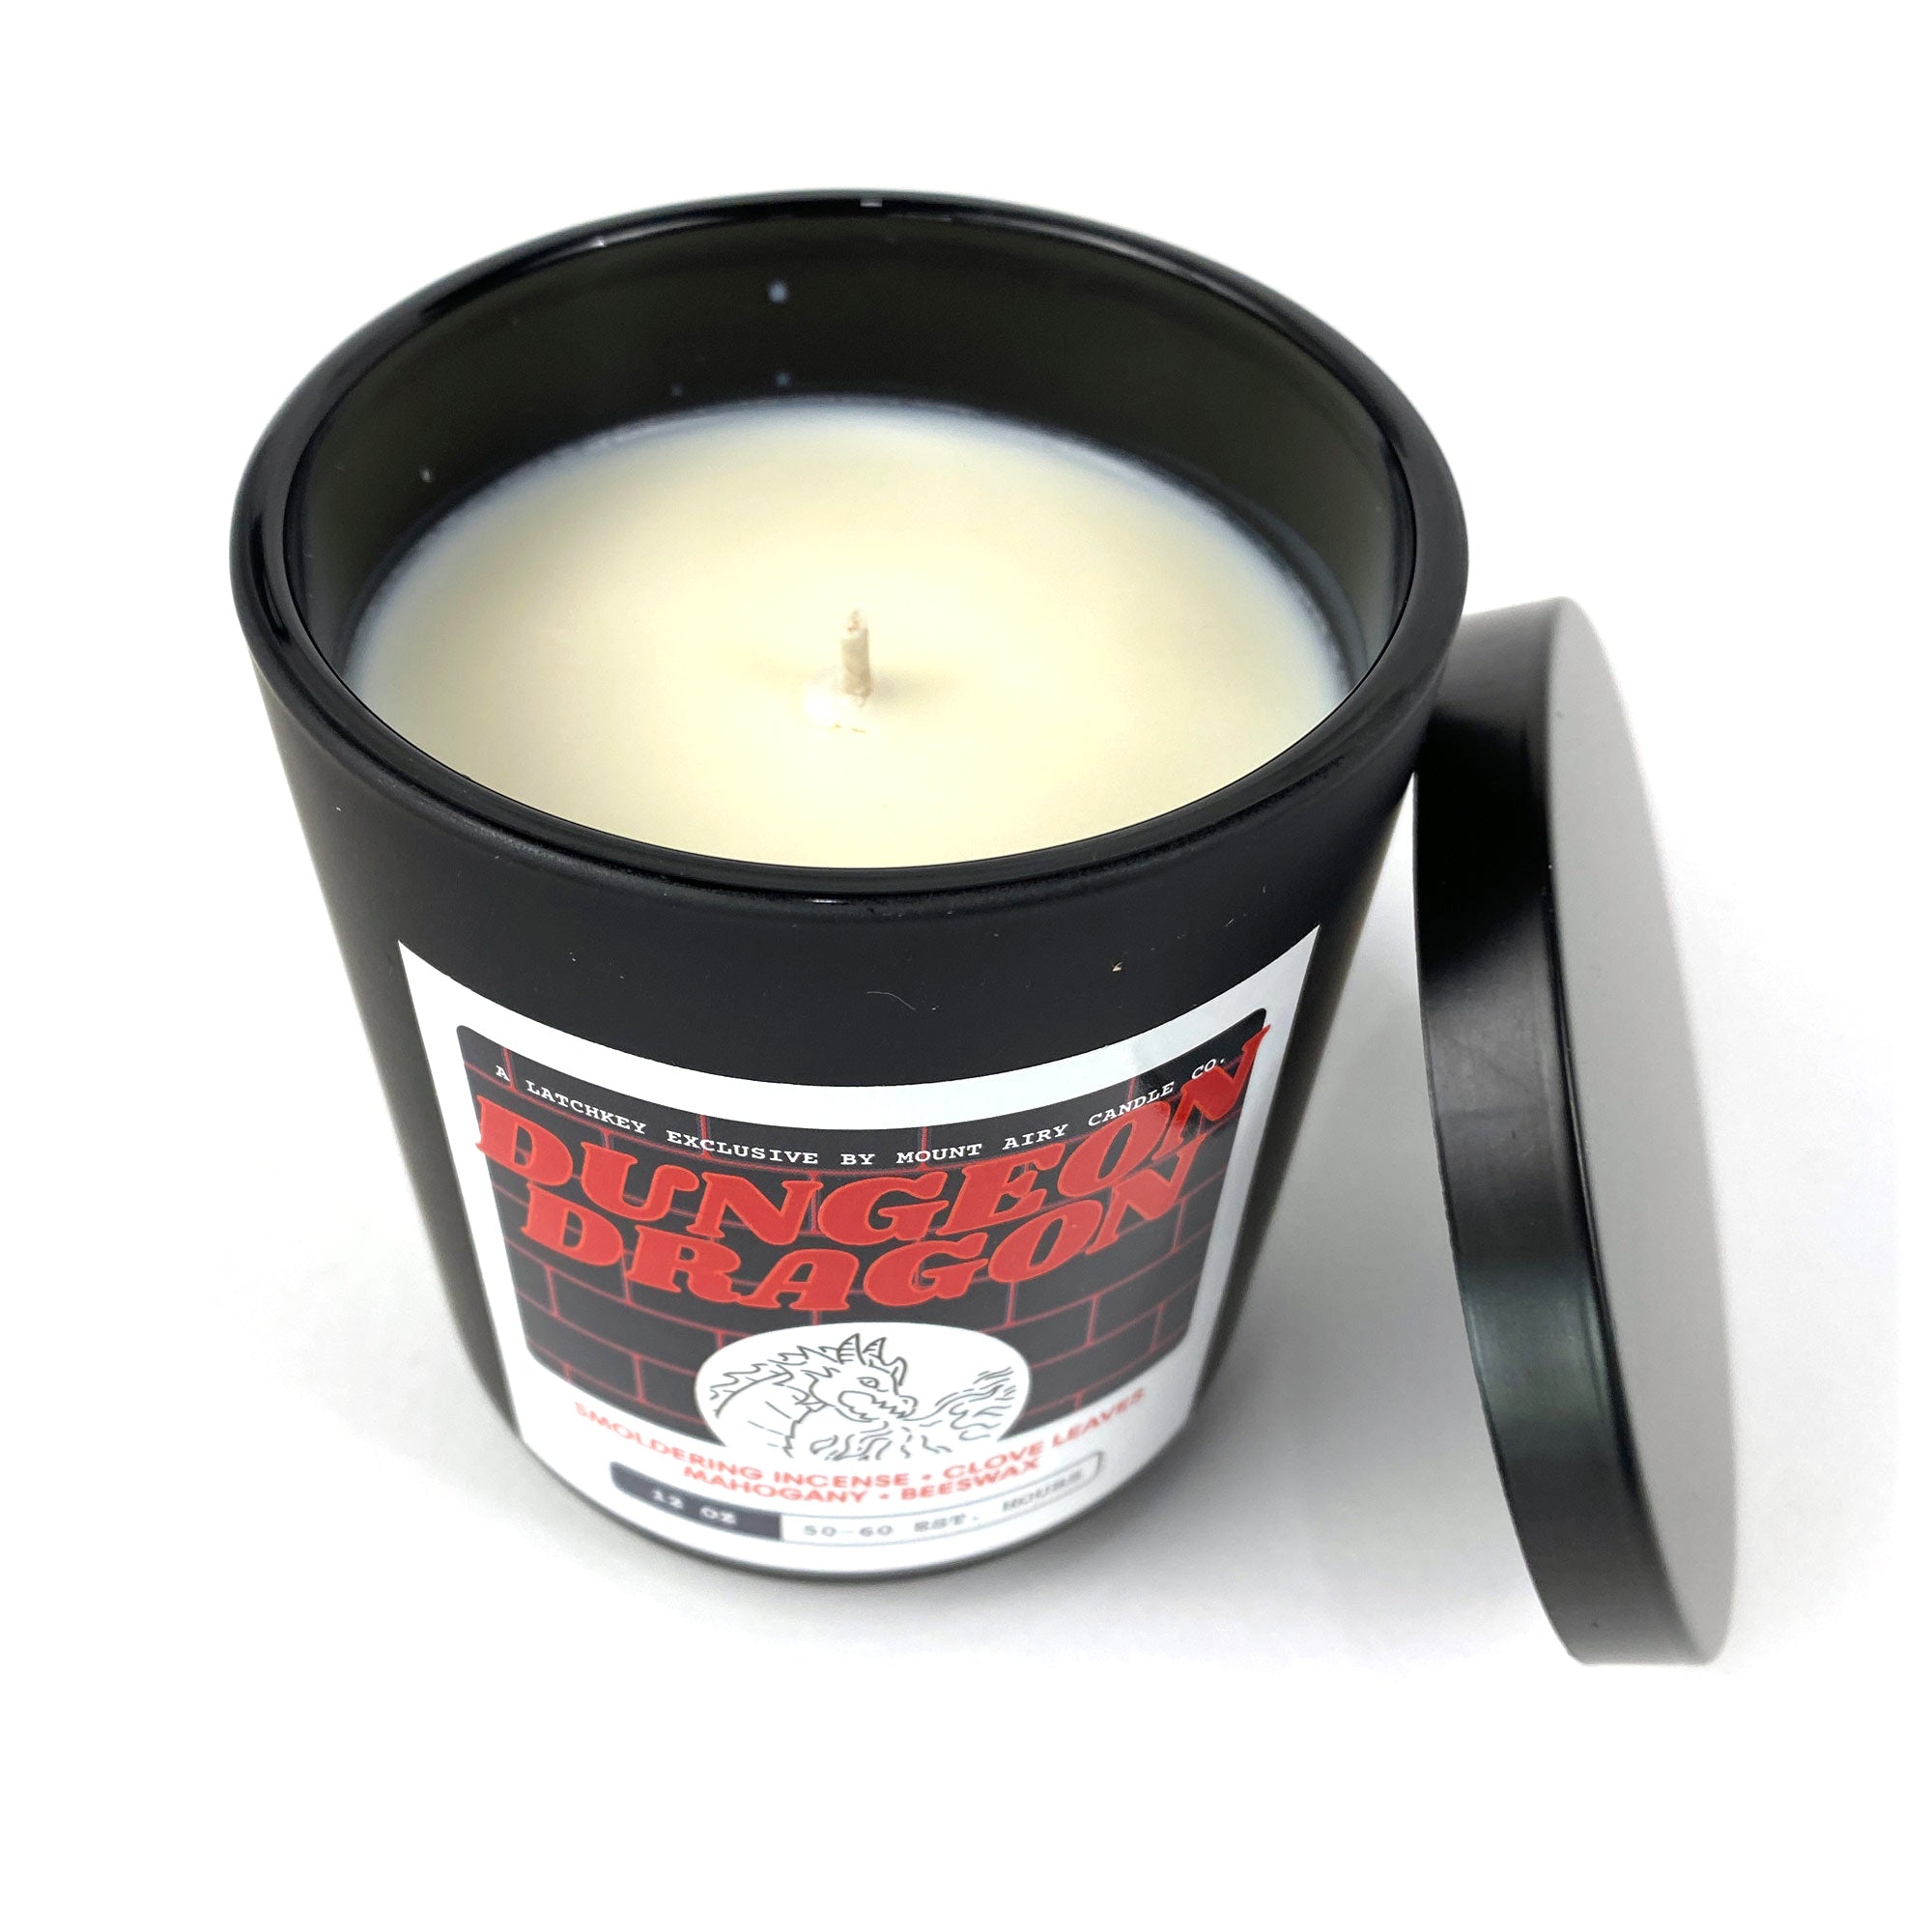 "Dungeon Dragon" Candle by Mount Airy Candle Co.